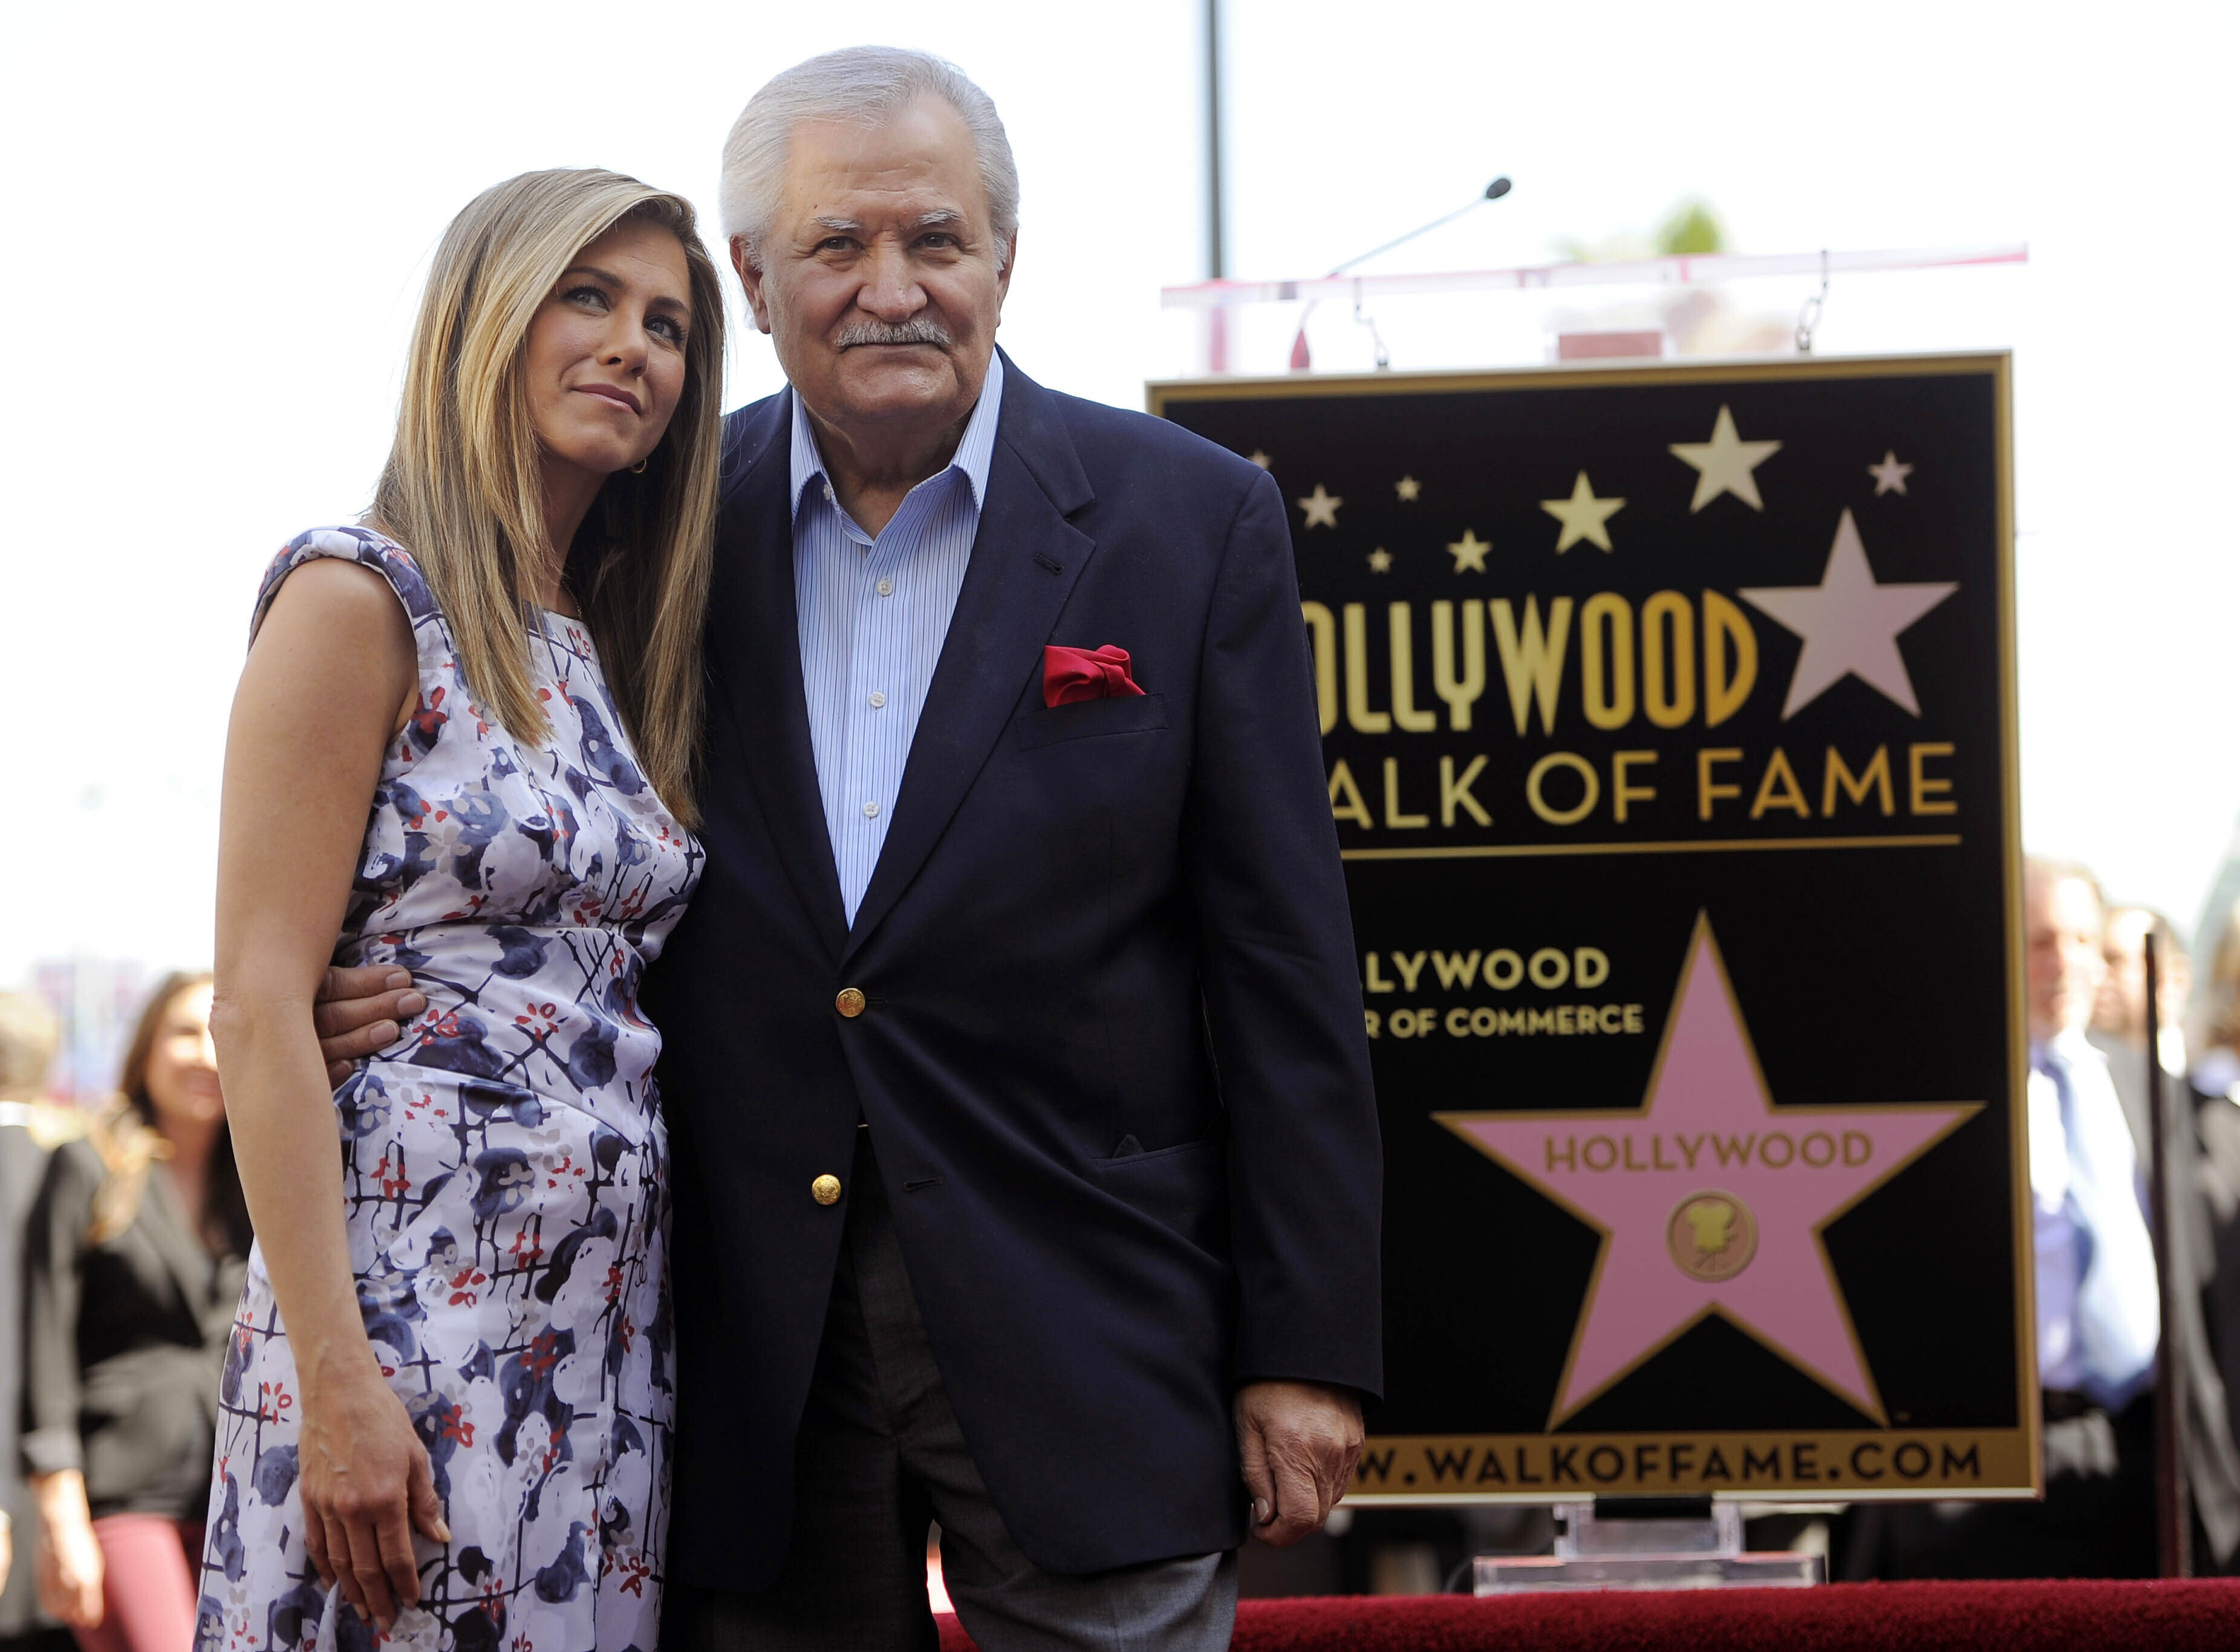 John Aniston, Star of ‘Days of Our Lives,’ Dead at 89